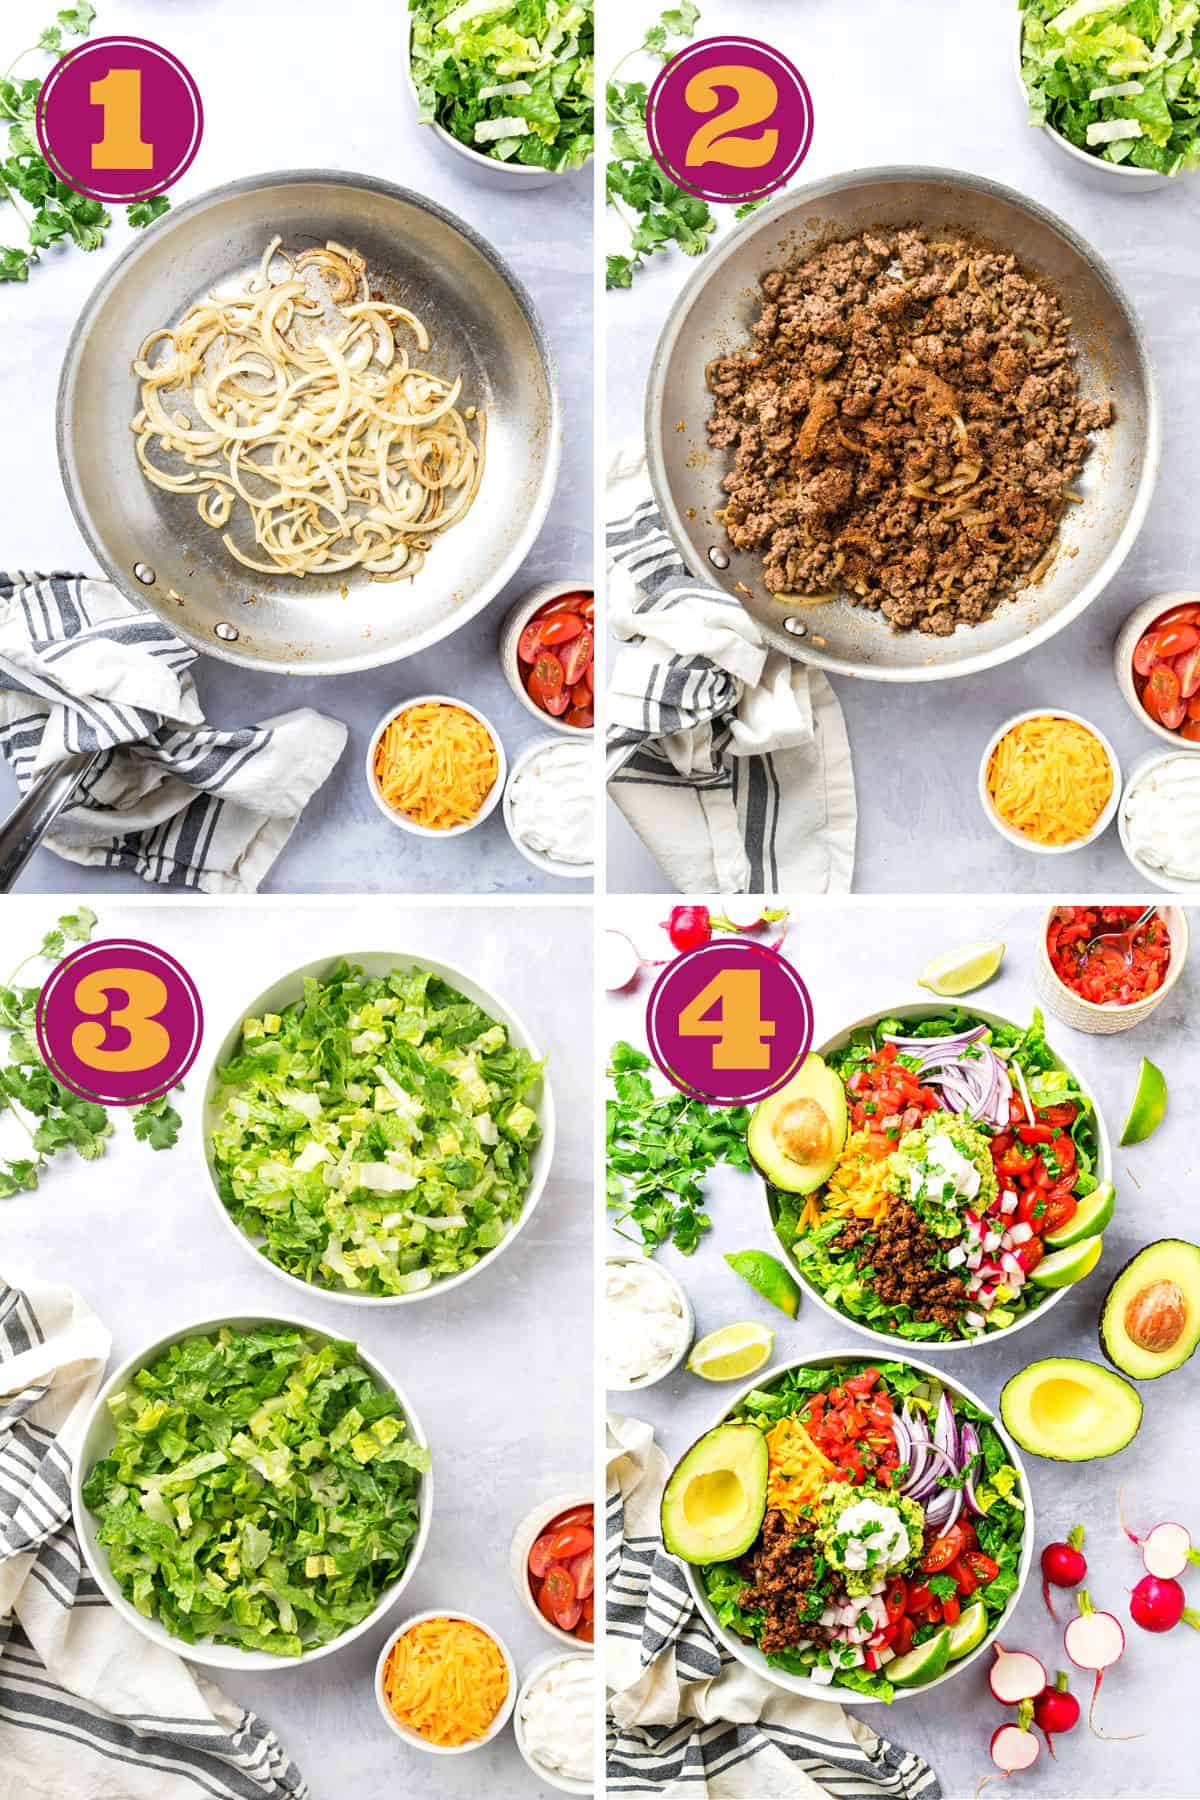 step-by-step instructions for how to make keto Taco Salad bowl with ground beef